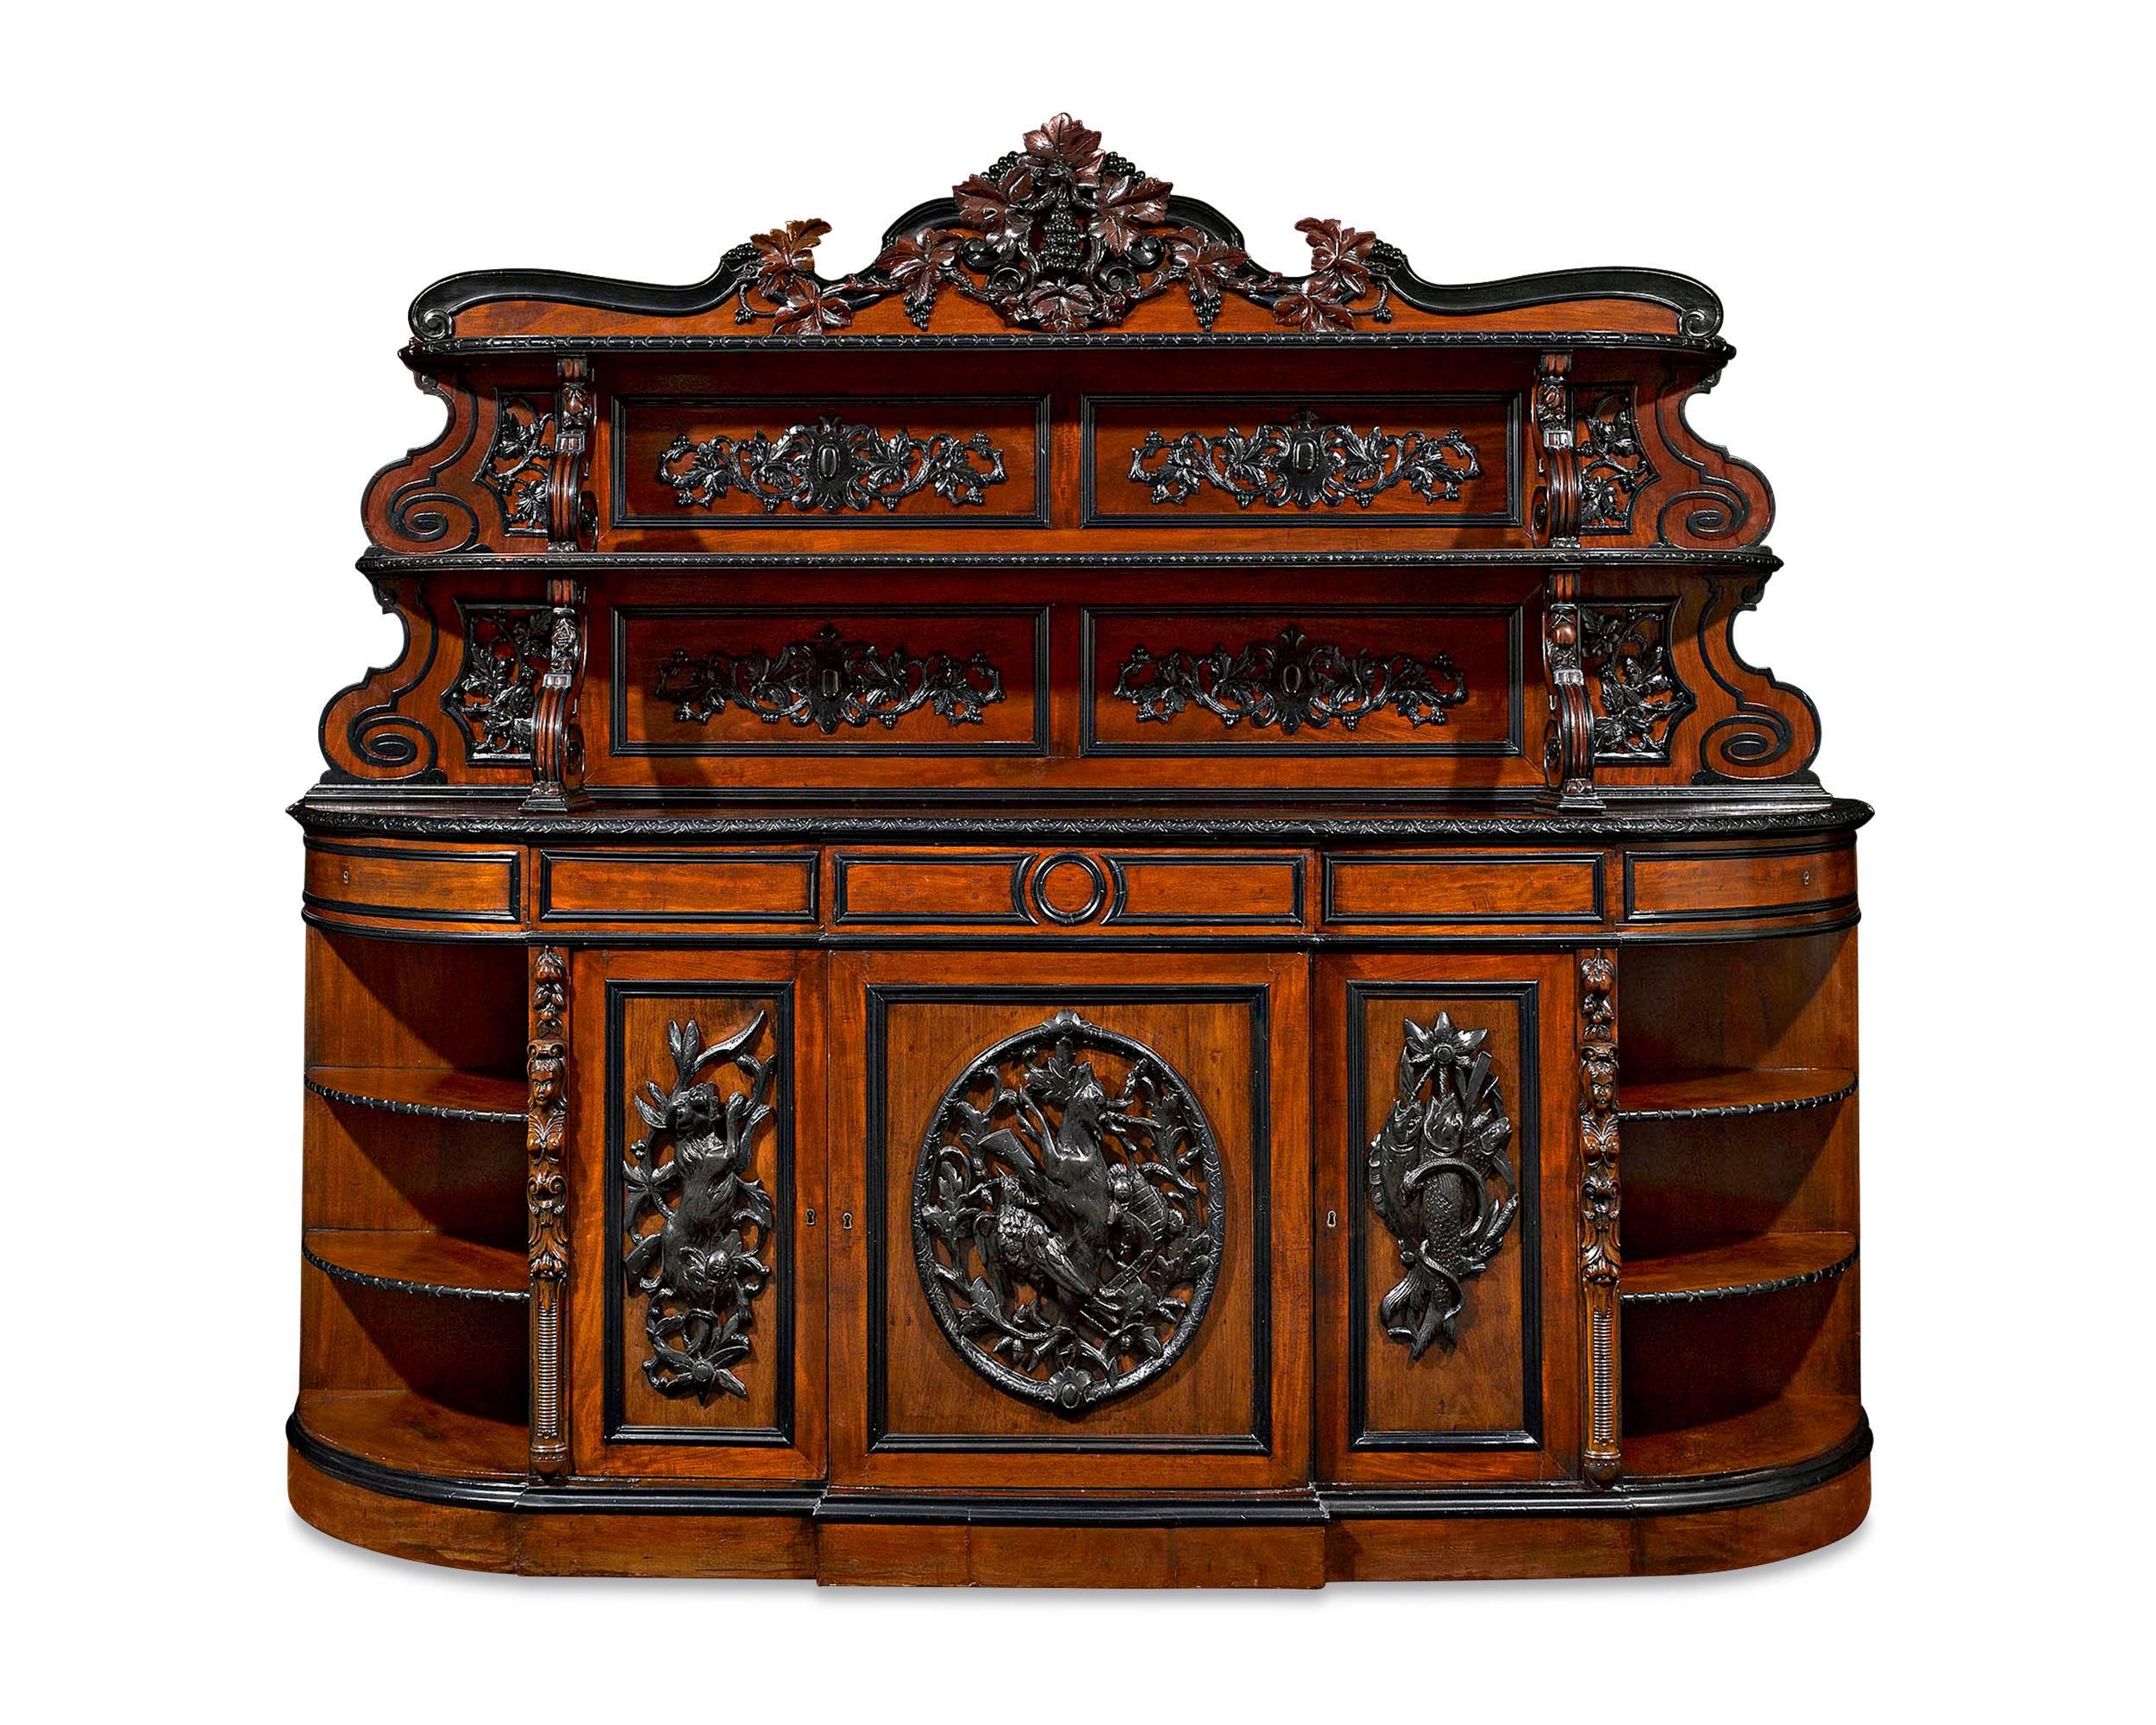 This magnificent French sideboard is a work of both massive size and extraordinary craftsmanship. Carved entirely from luxurious mahogany, the bold piece of furniture reaches a width of over 8 feet and a height of over 7 feet and displays all of the